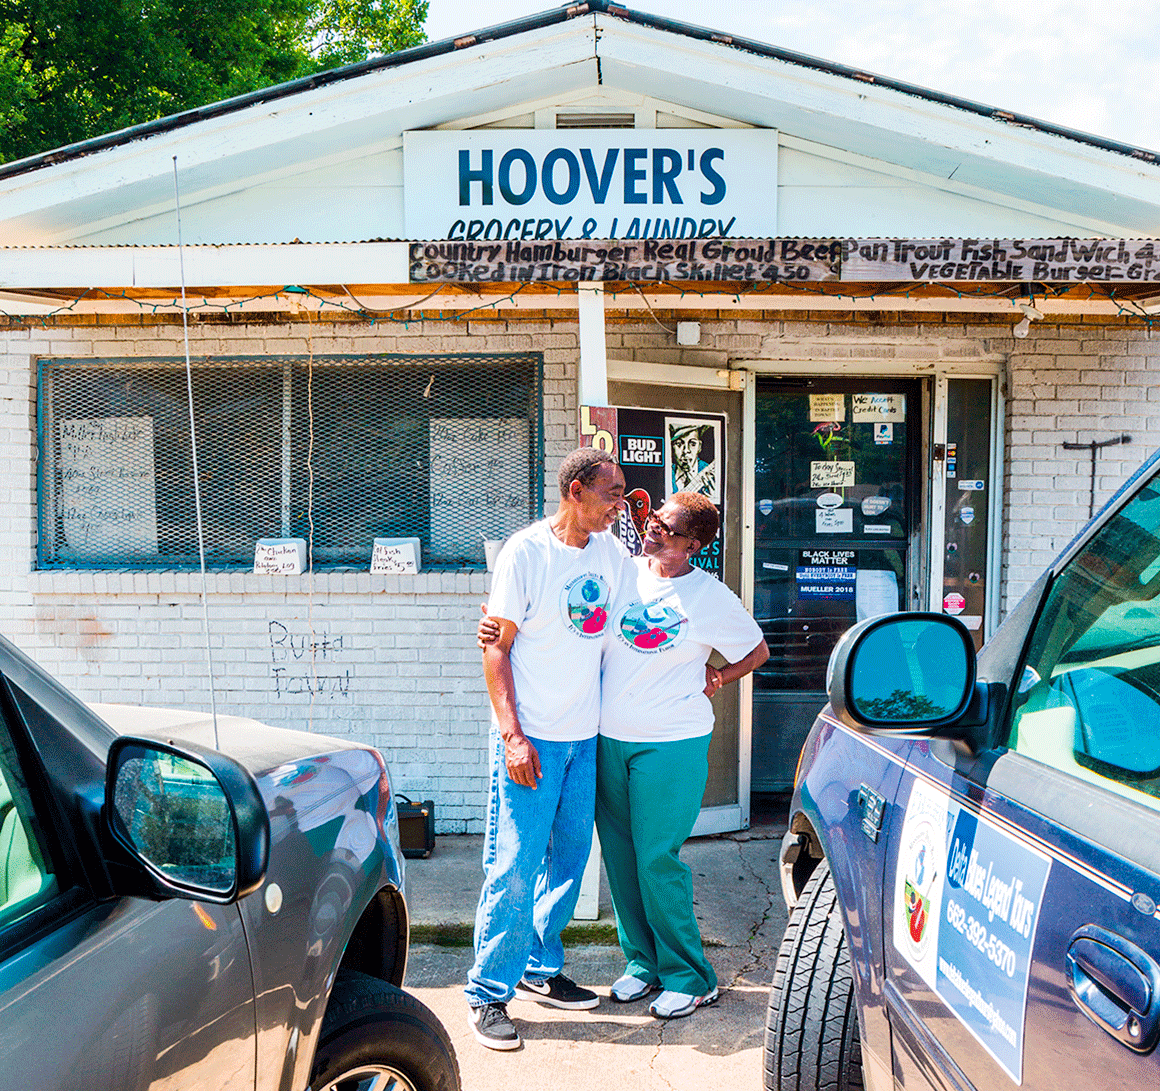 Sylvester and Mary Hoover of Hoover's Grocery in Greenwood, Miss. (Andrea Behrends and Helene Dujardin)